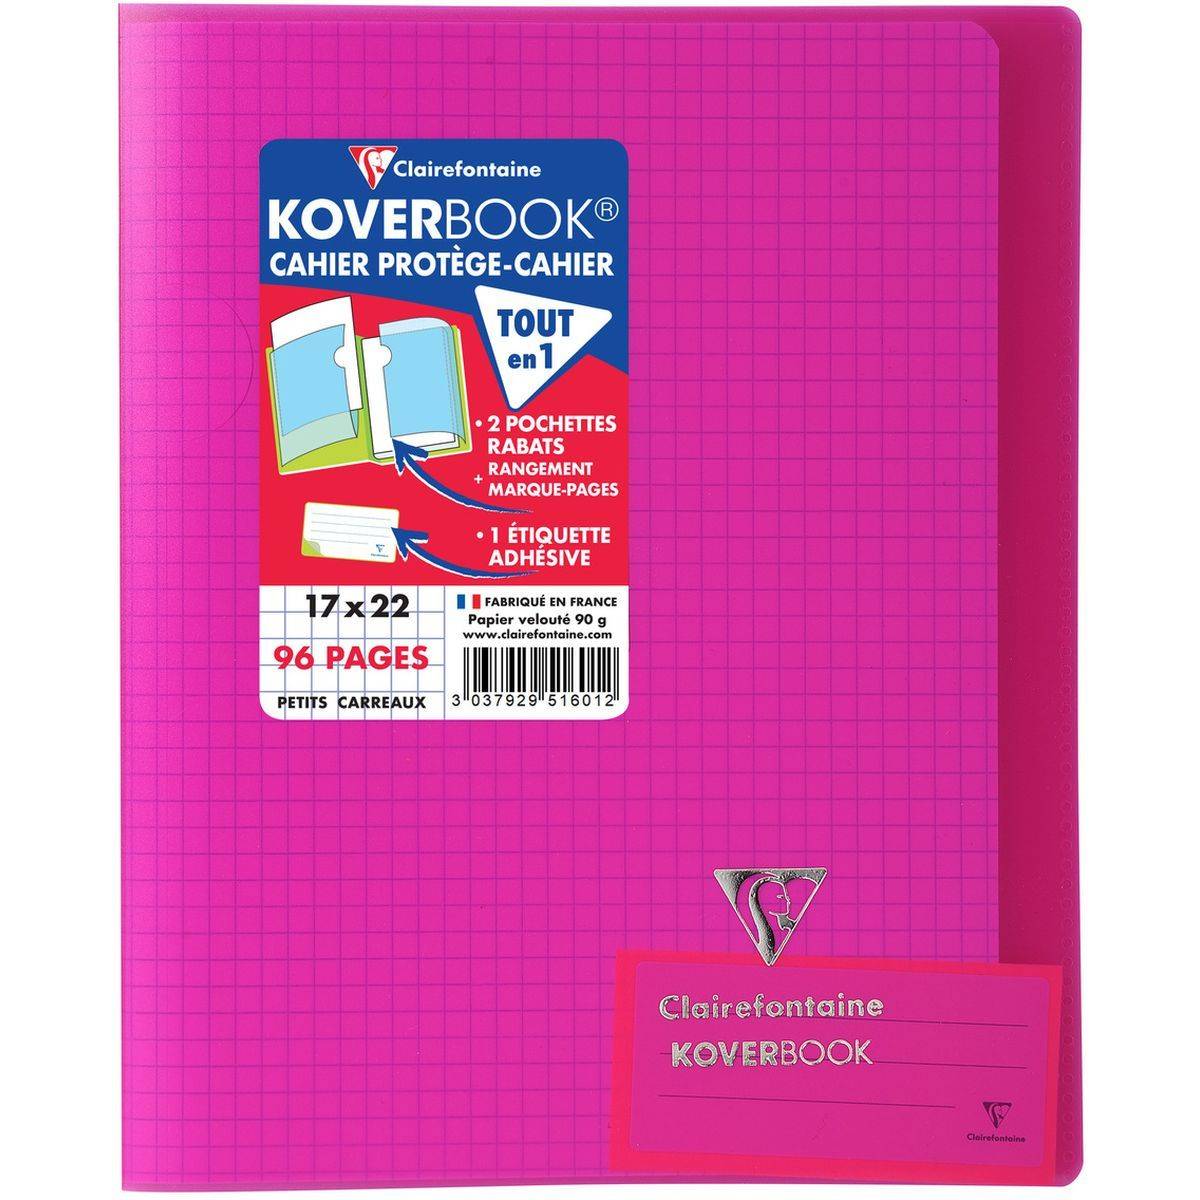 Clairefontaine Koverbook 96 Pages - 17x22 - Small Squares